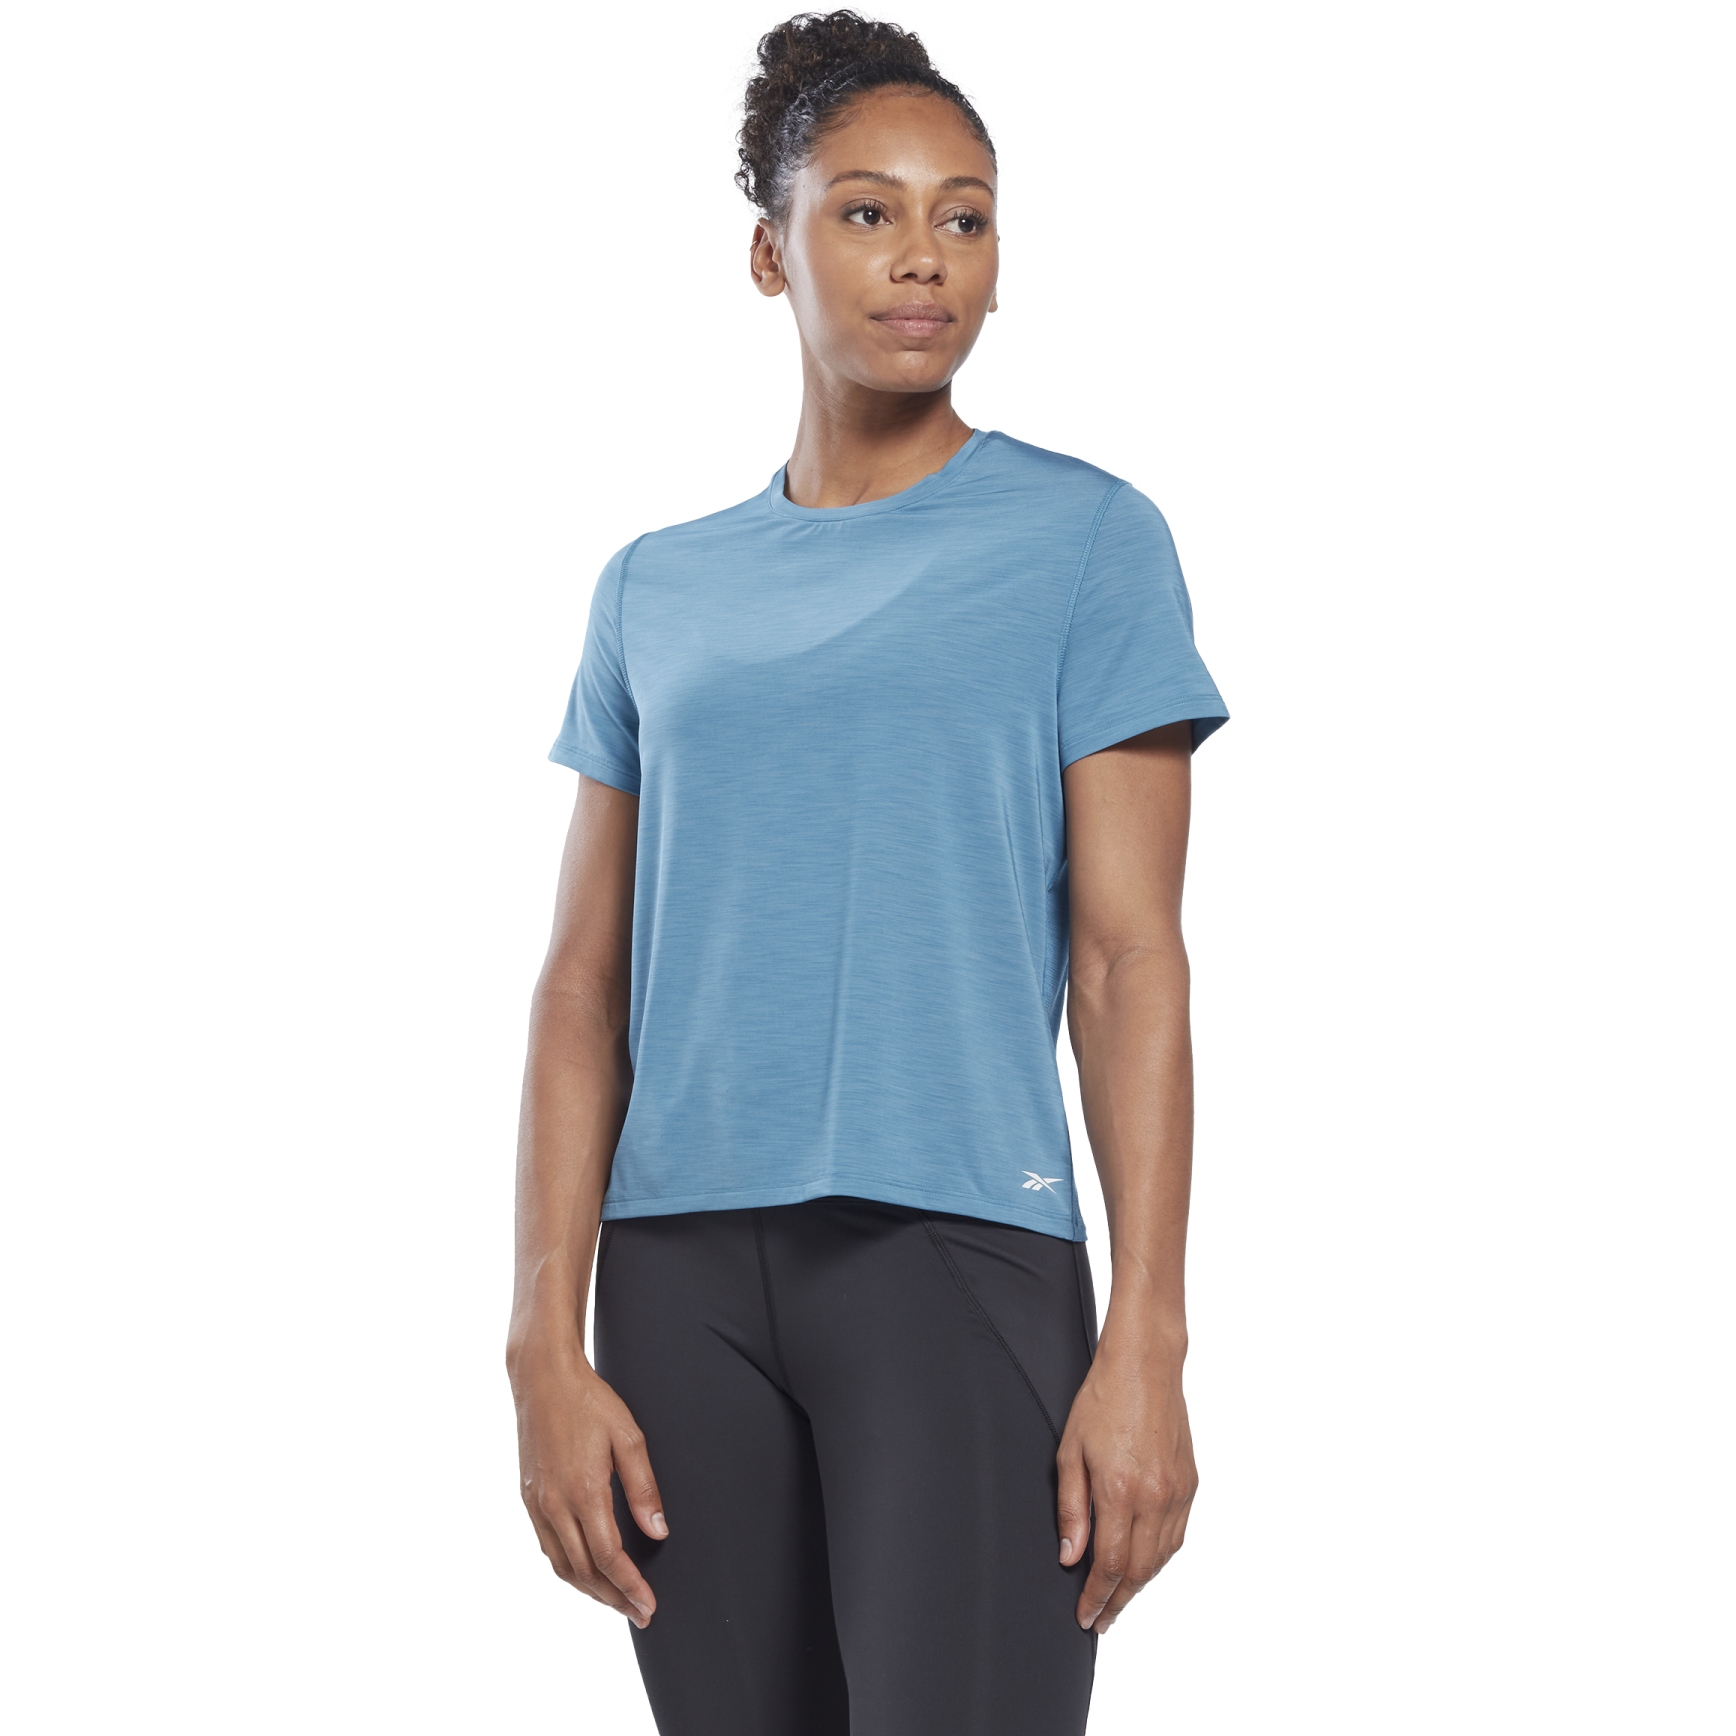 Productfoto van Reebok ACTIVCHILL Athlethic T-Shirt Dames - steely blue